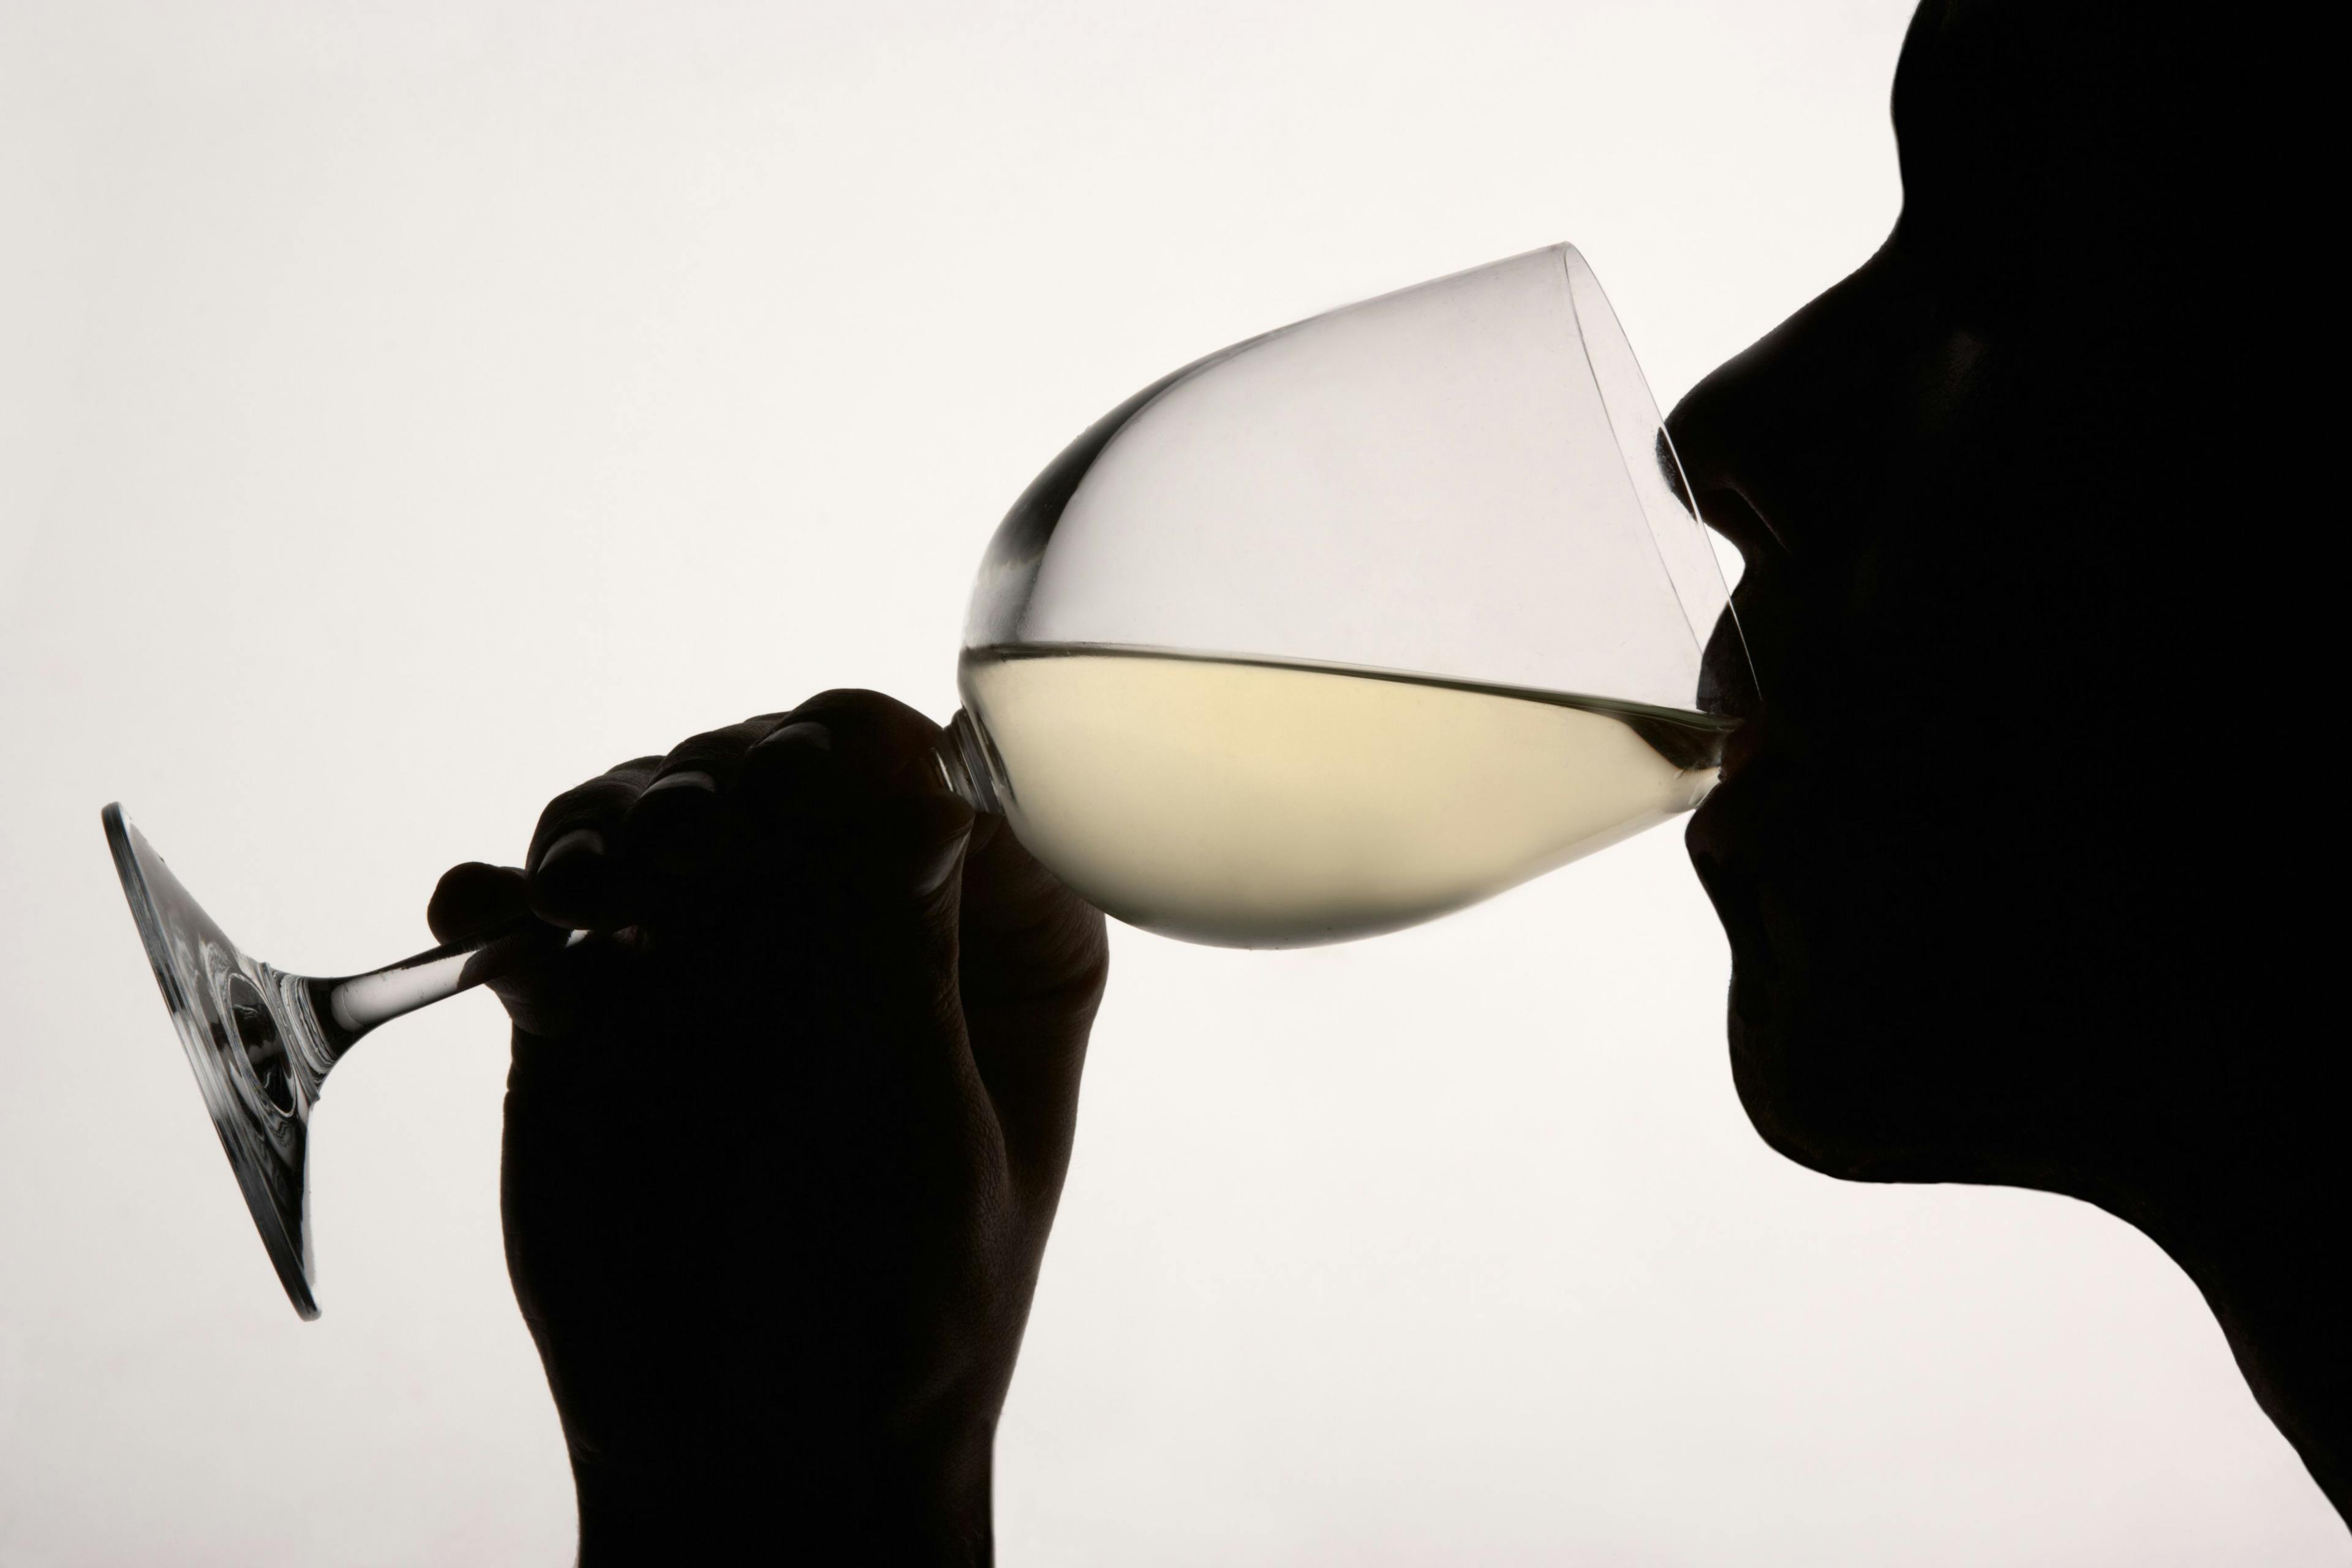 Silhouette of person drinking white wine | Image credit: Monkey Business – stock.adobe.com